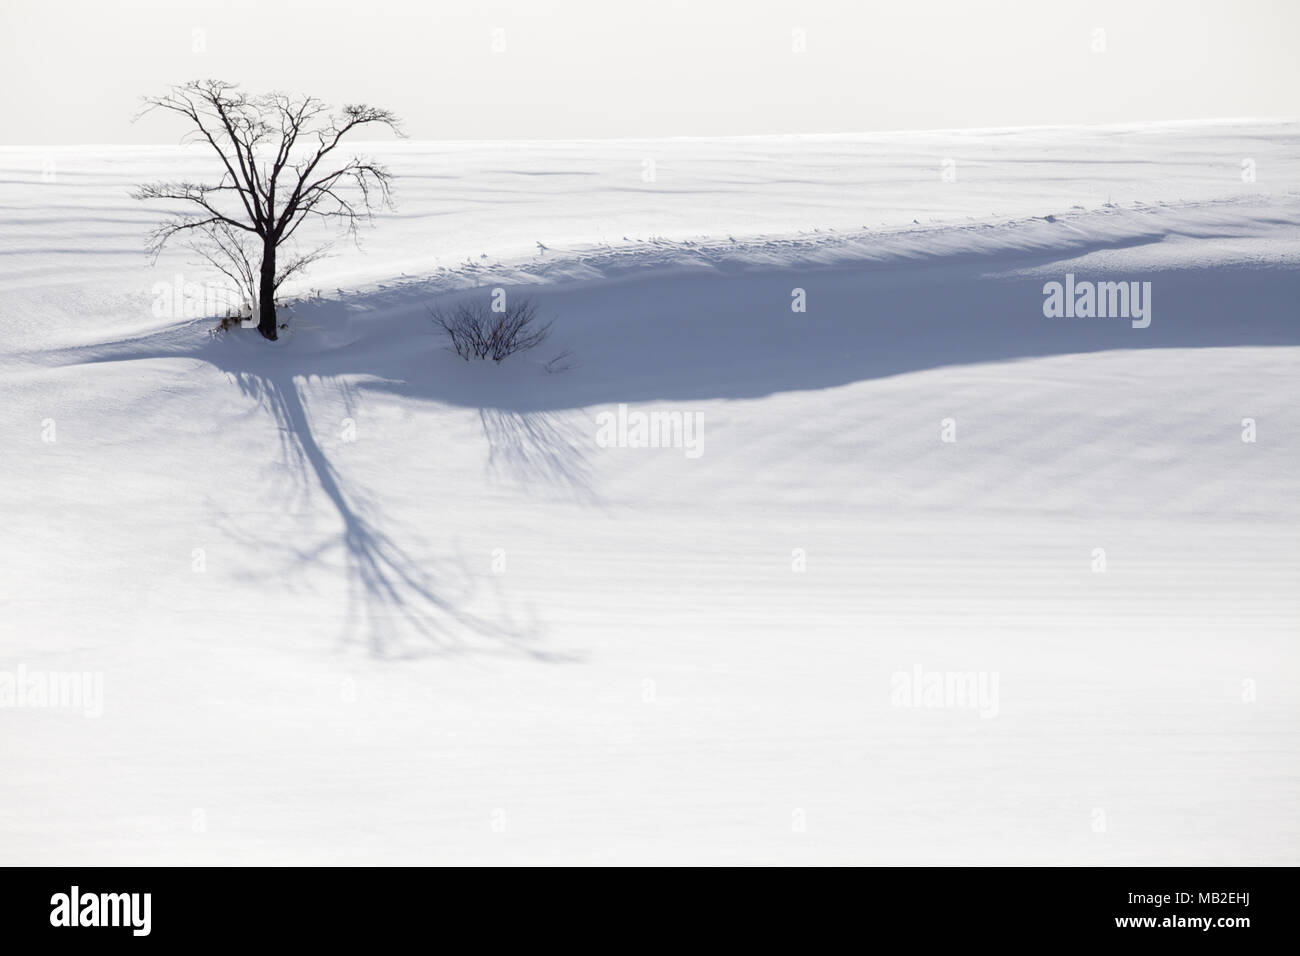 A tree in a snowy landscape Stock Photo